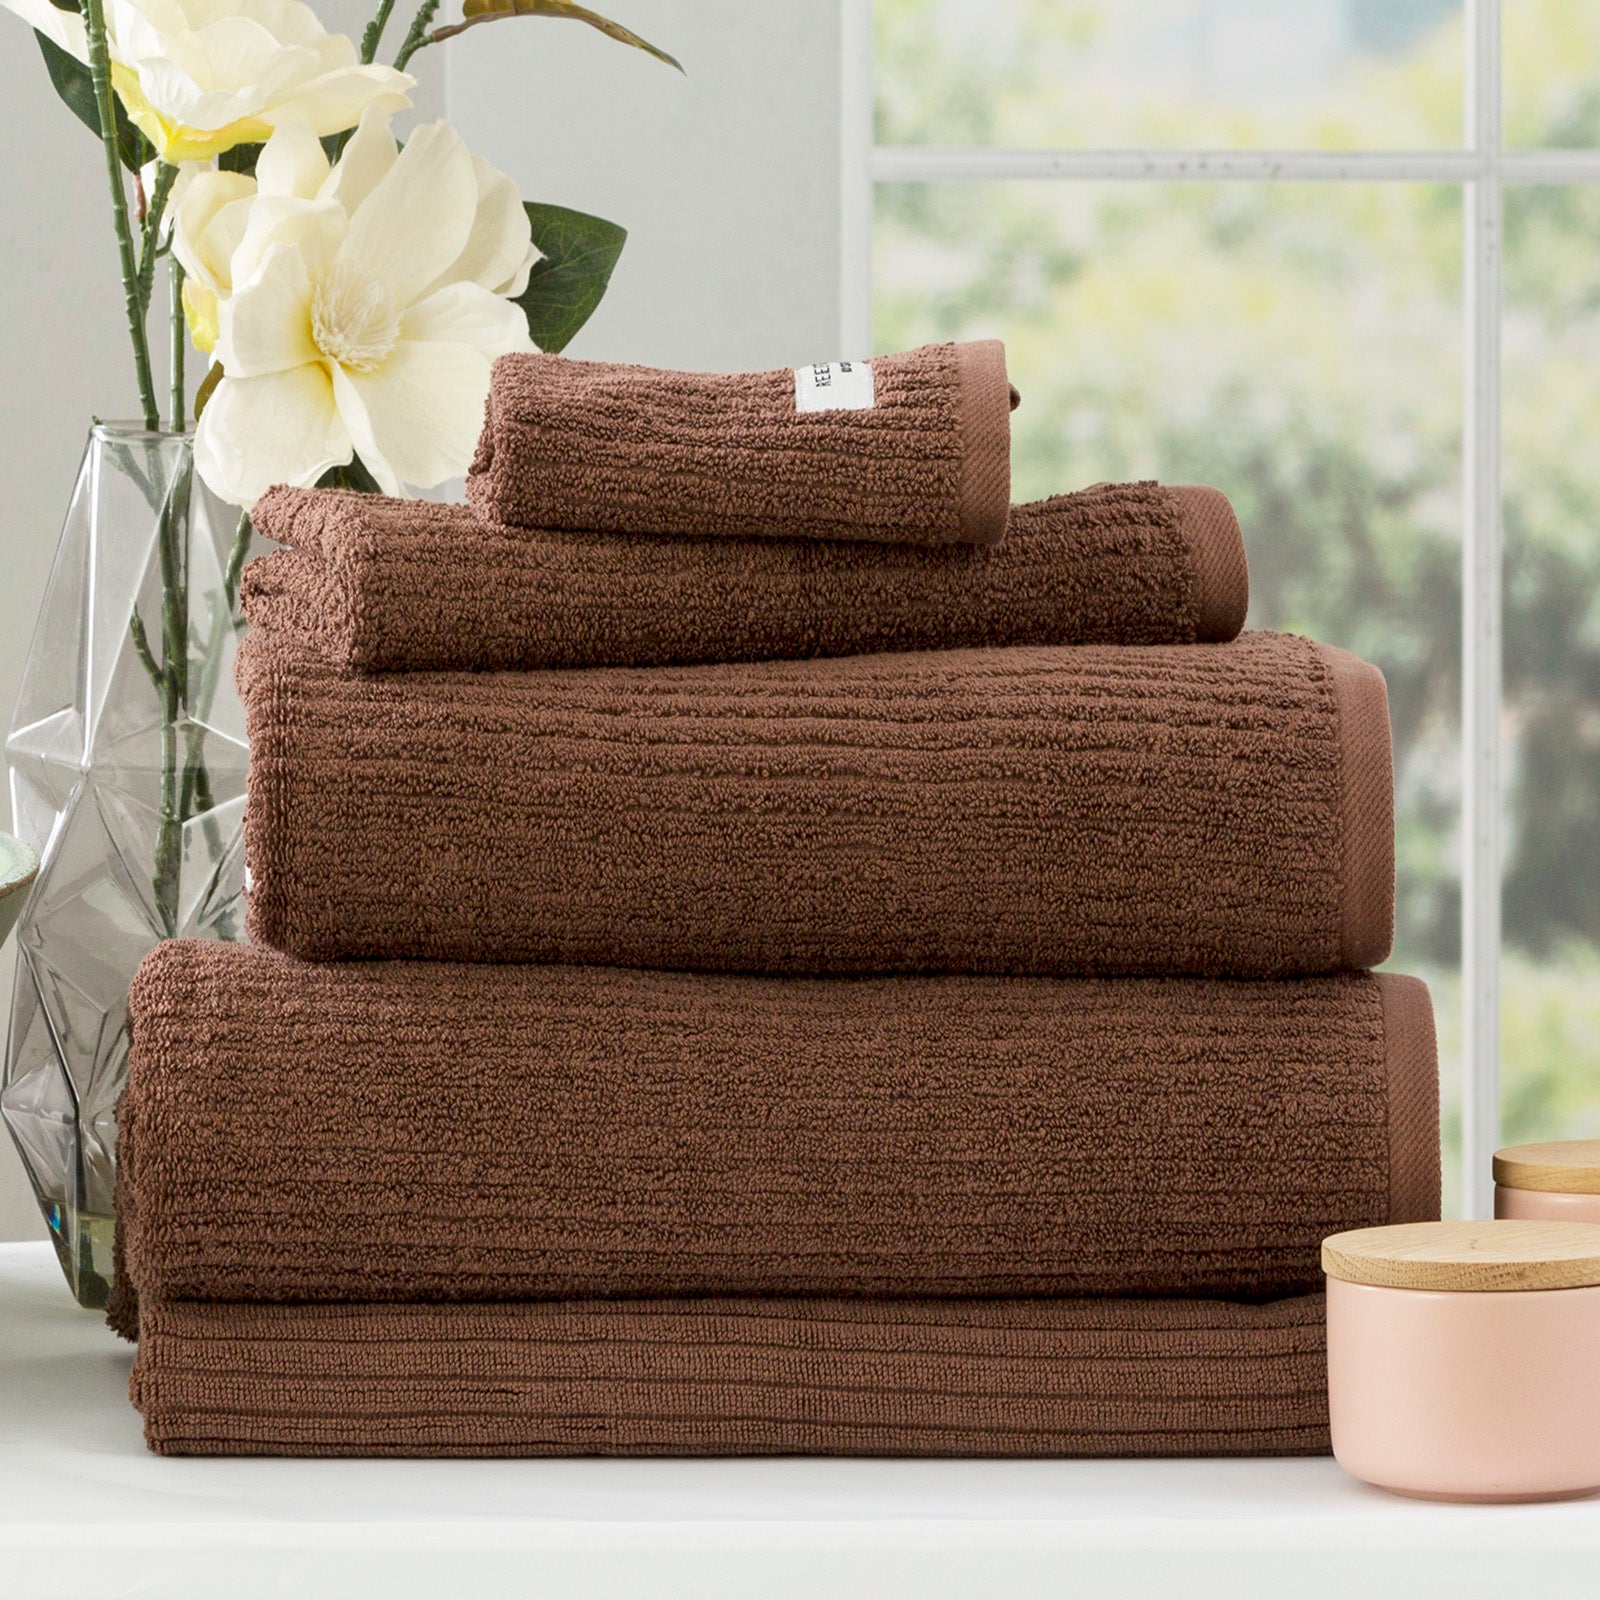 Renee Taylor Cobblestone 650 GSM Cotton Ribbed Towel Packs 5pc Toffee